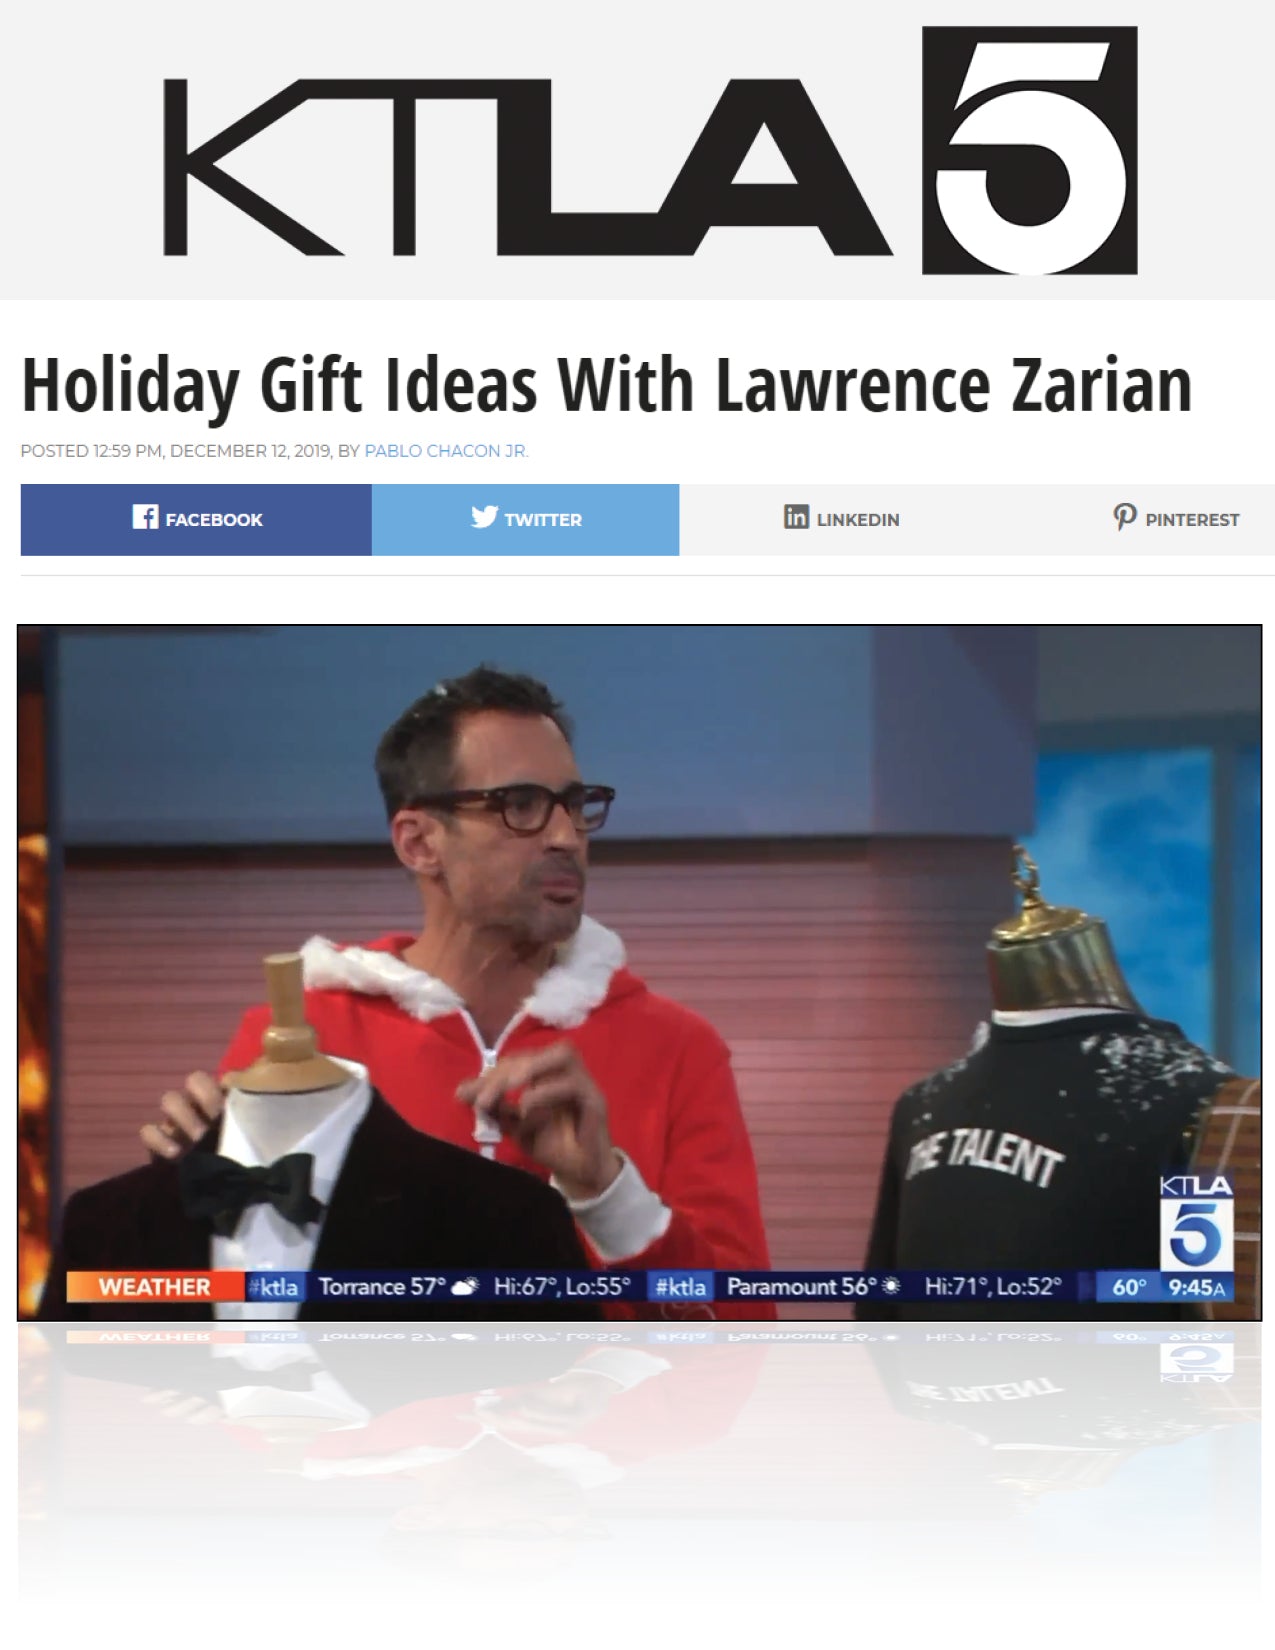 Holiday Gift Ideas With Lawrence Zarian | KTLA 5 | DECEMBER 2019